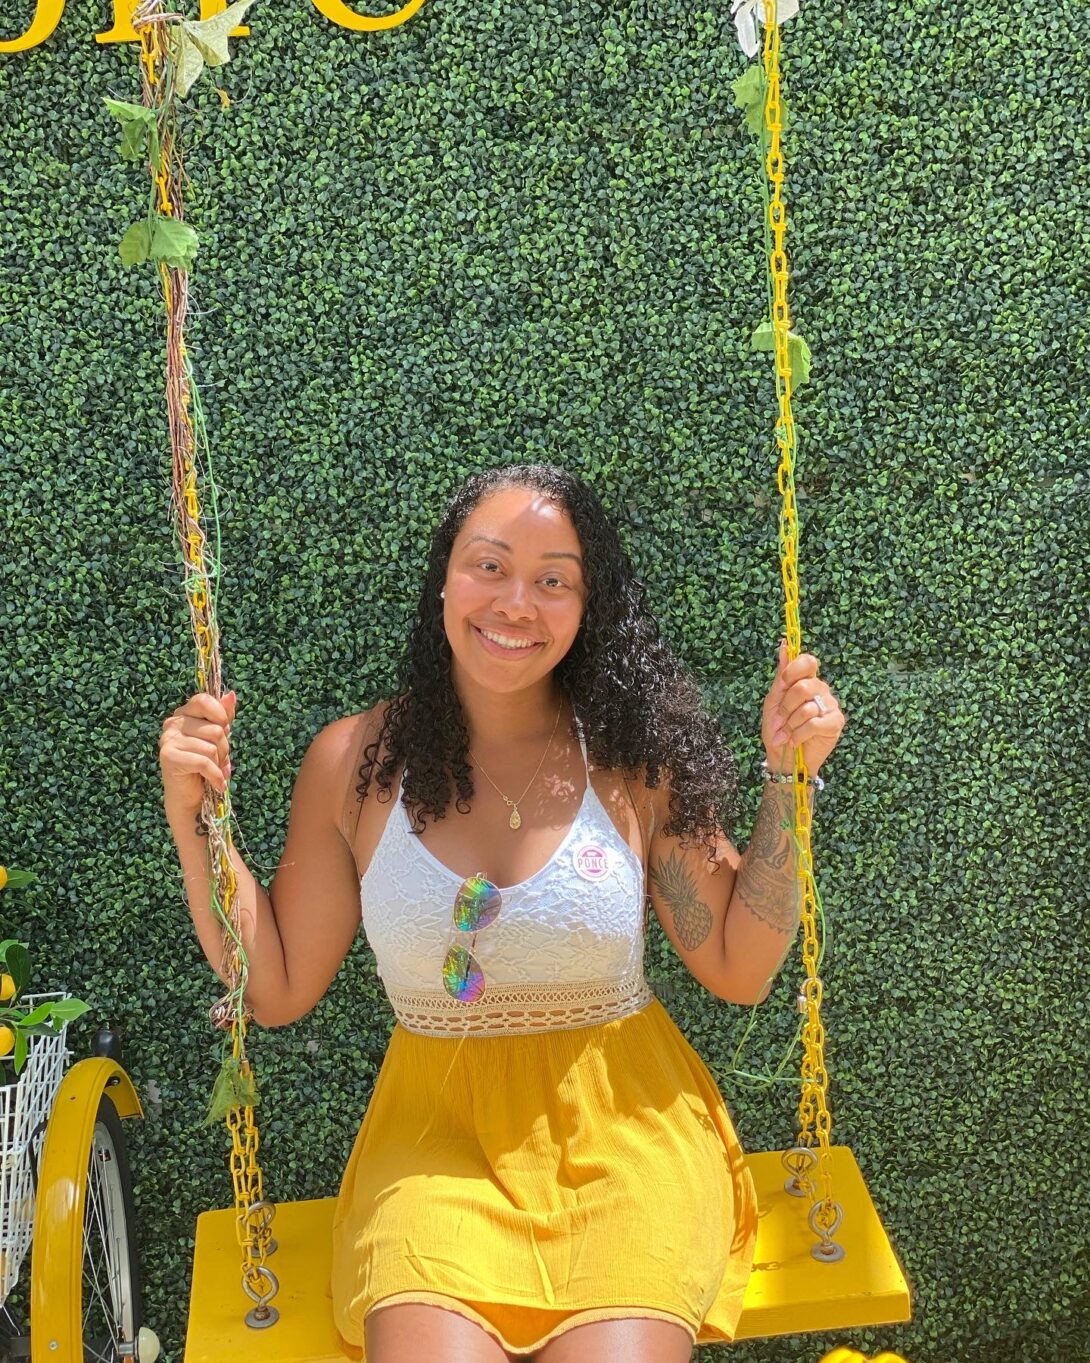 Green, grassy background, with Anissa Camacho, wearing a white tank top and a yellow skirt, is sitting on a yellow swing. The strings of the swing are also yellow and decorated with green leaves.